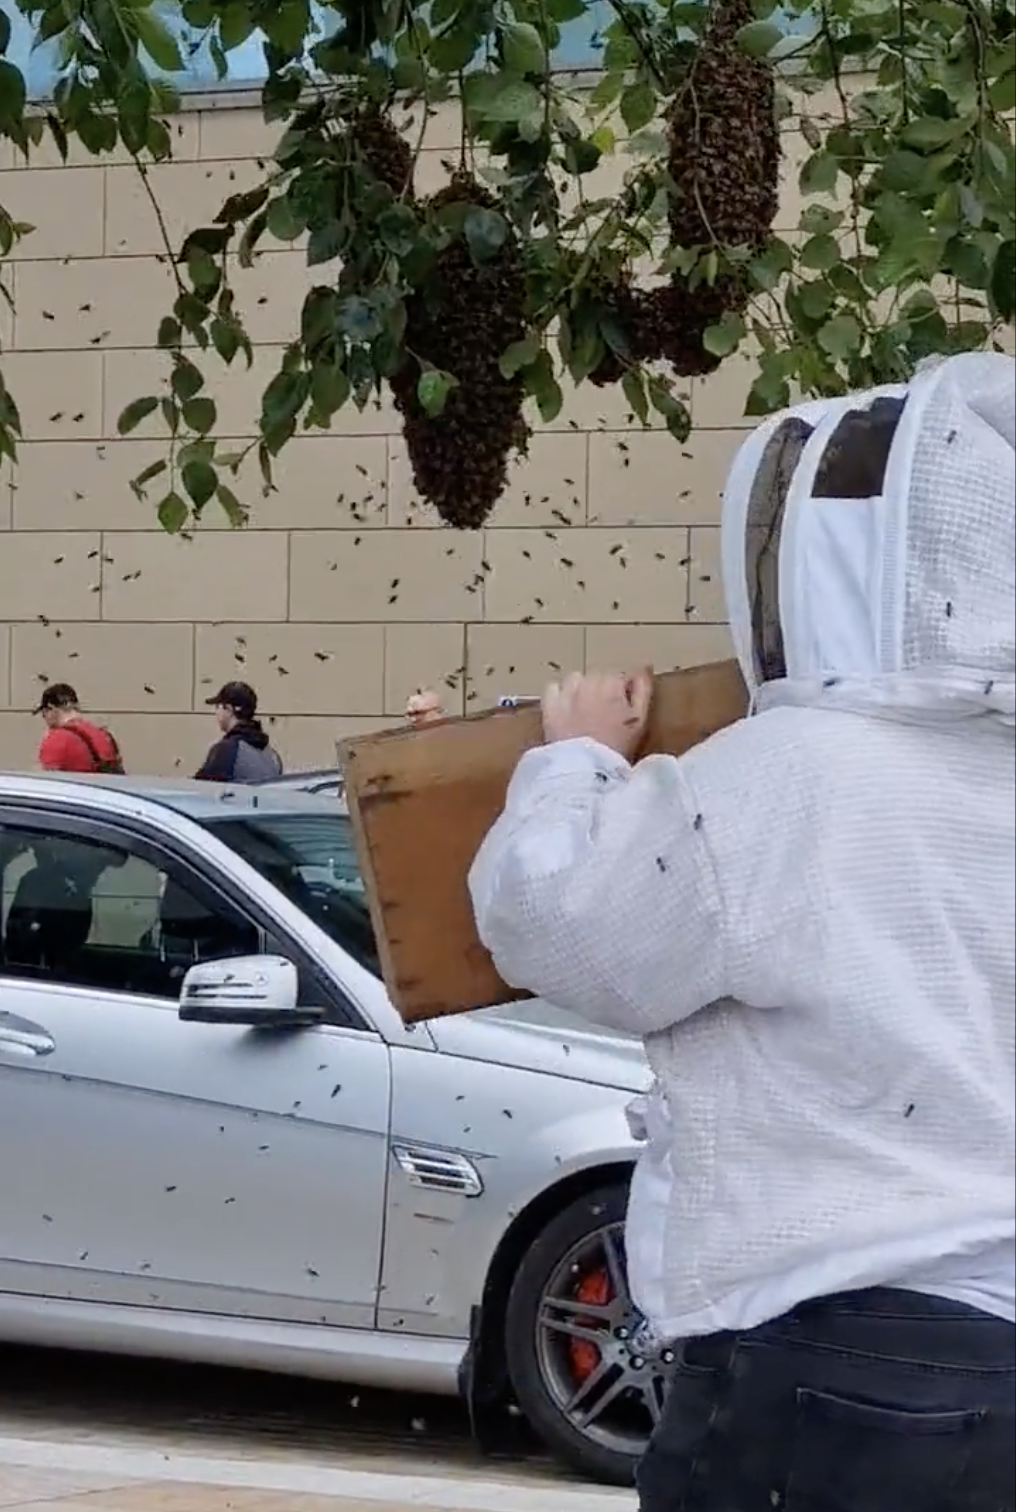 Beekeeper scoops up bees with BARE HANDS as swarm descends on Greater Manchester again, The Manc